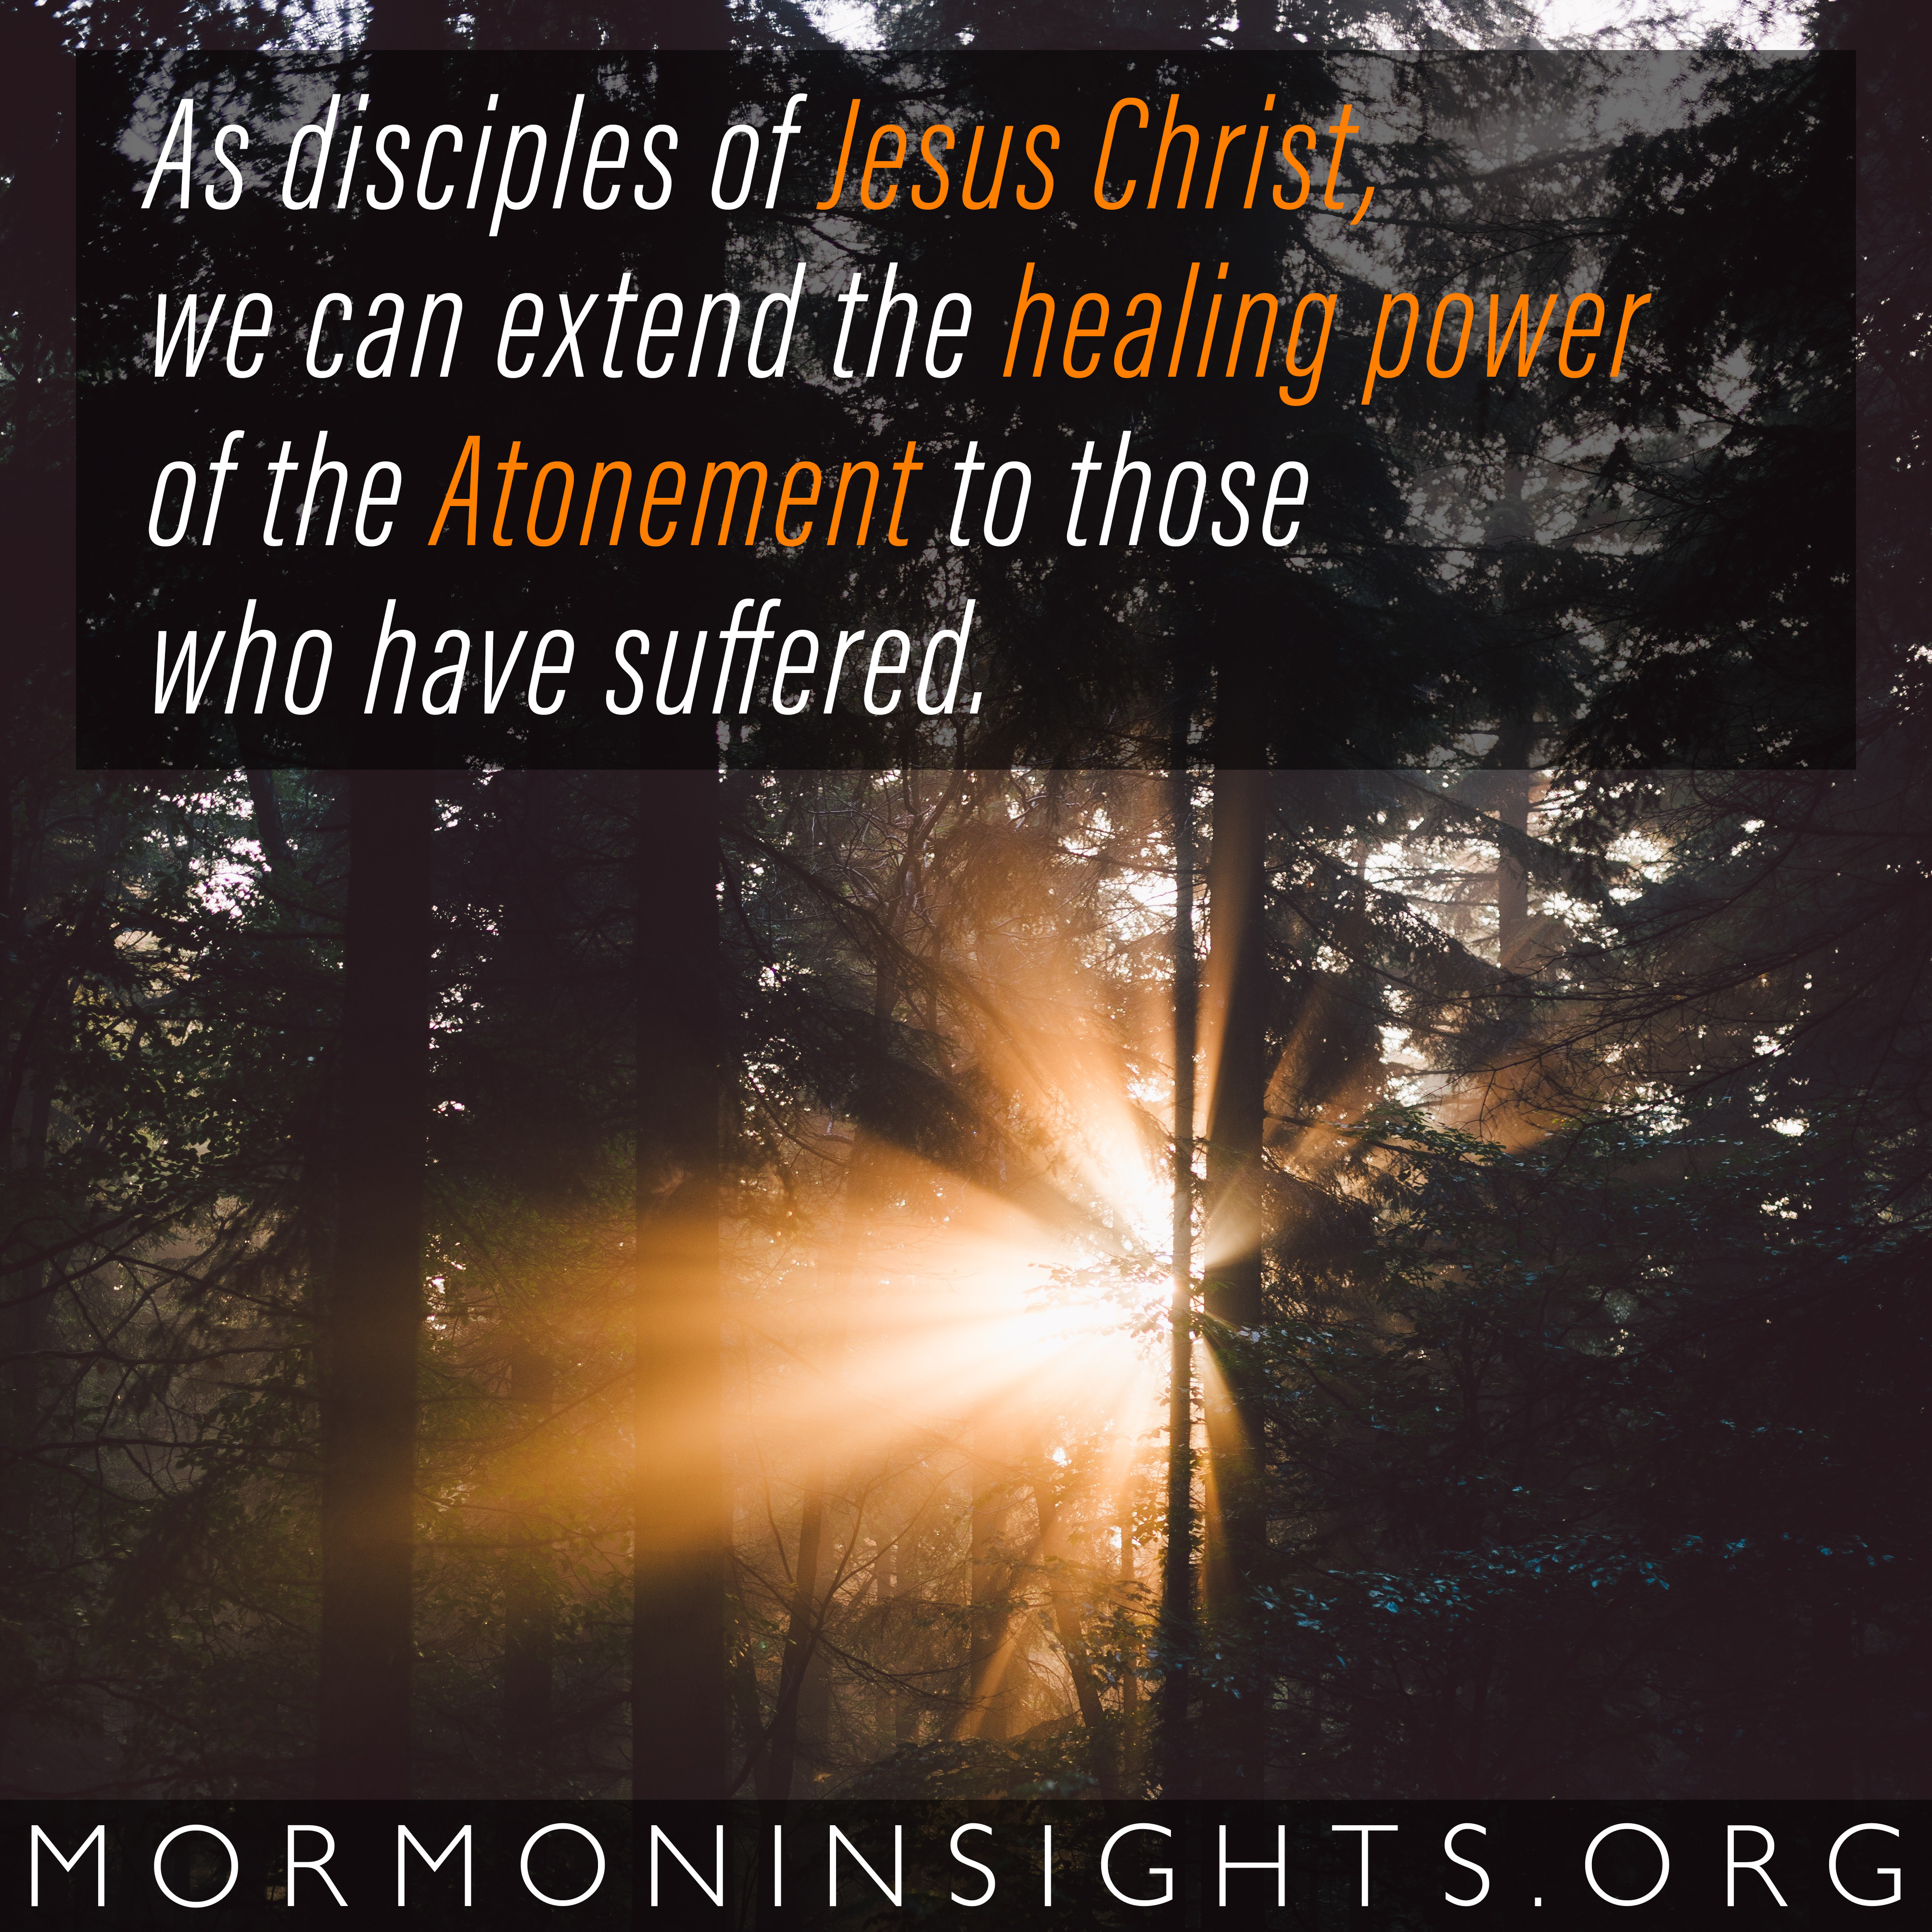 As disciples of Jesus Christ, we can extend the healing power of the Atonement to those who have suffered.